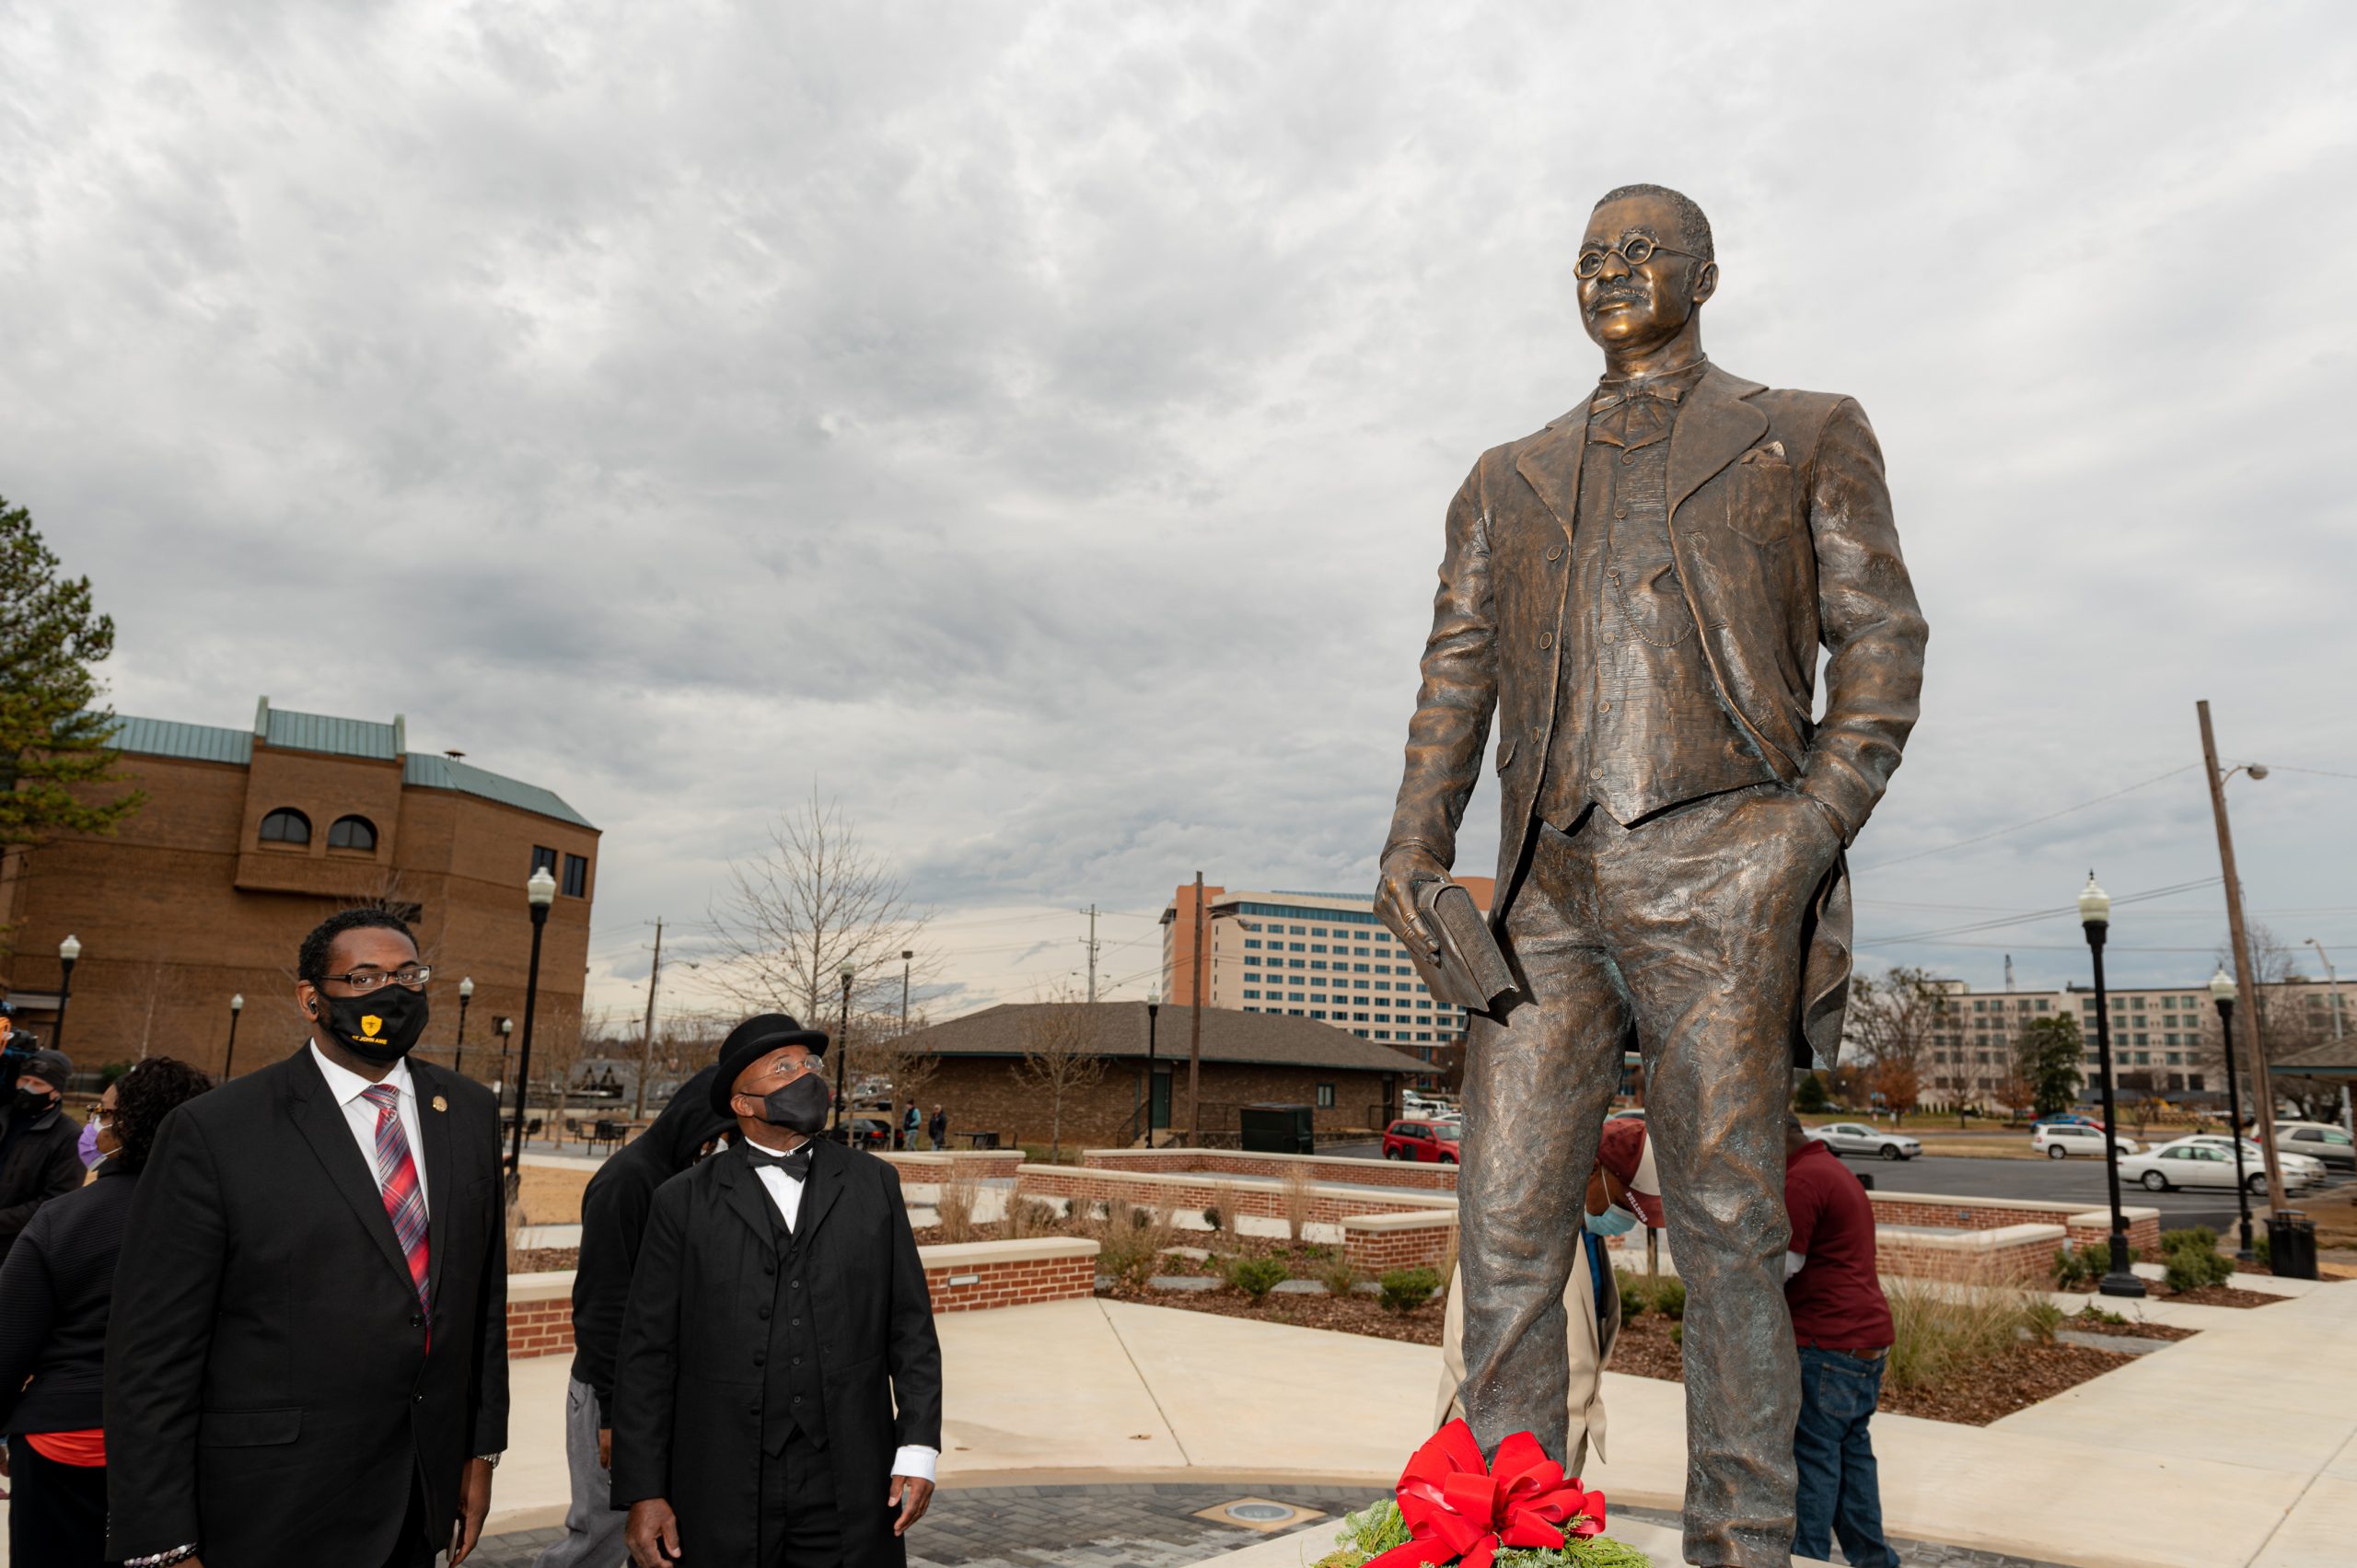 Alumni take a closer look at the new statue of Dr. Councill